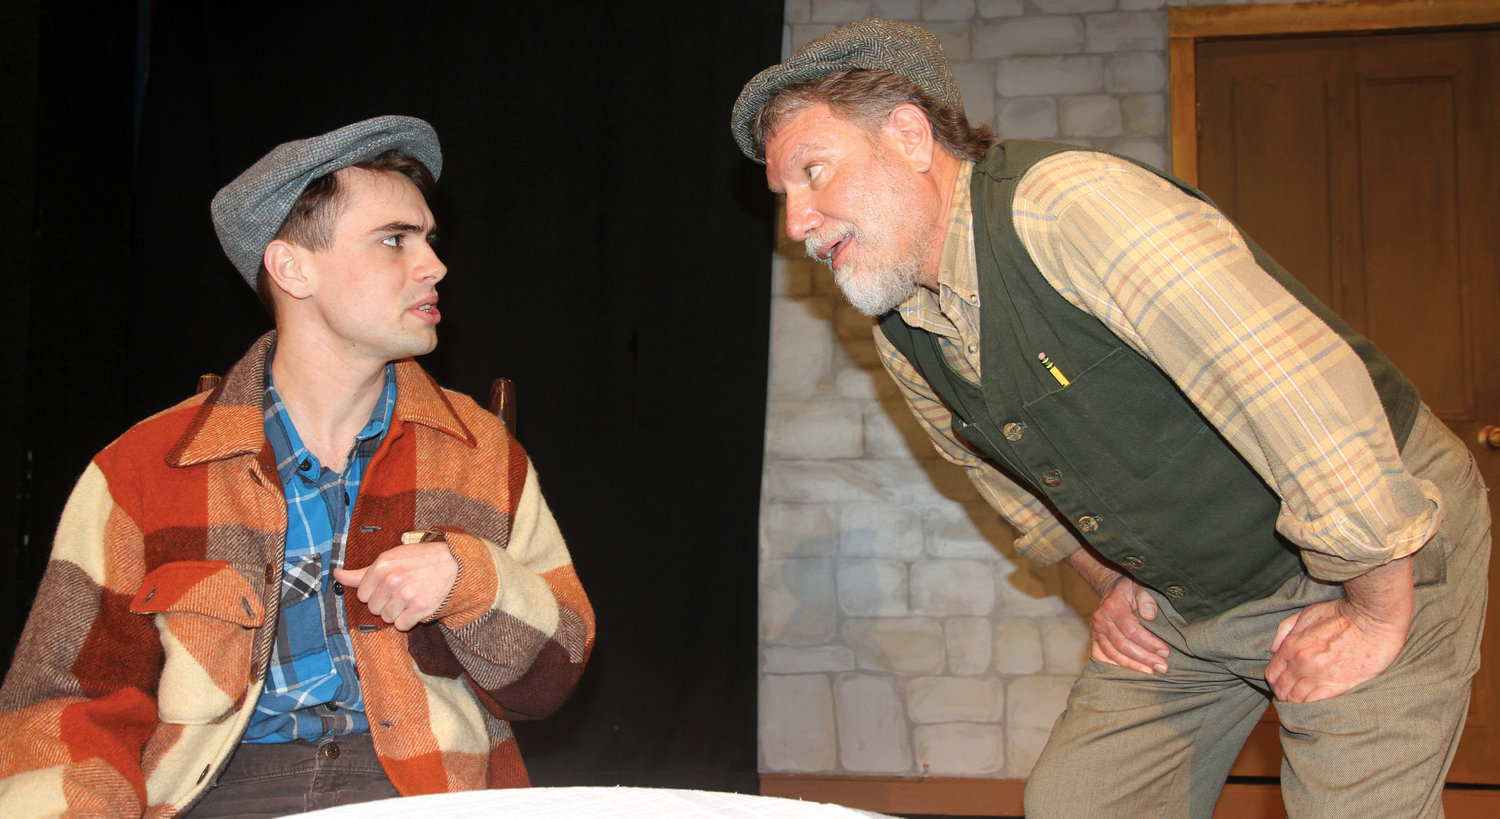 This will be the first time Tristan Riley, left, will be in a title role. He portrays Billy Claven. He is seen here with David Wayne Johnson, who portrays Johnnypateenmike.